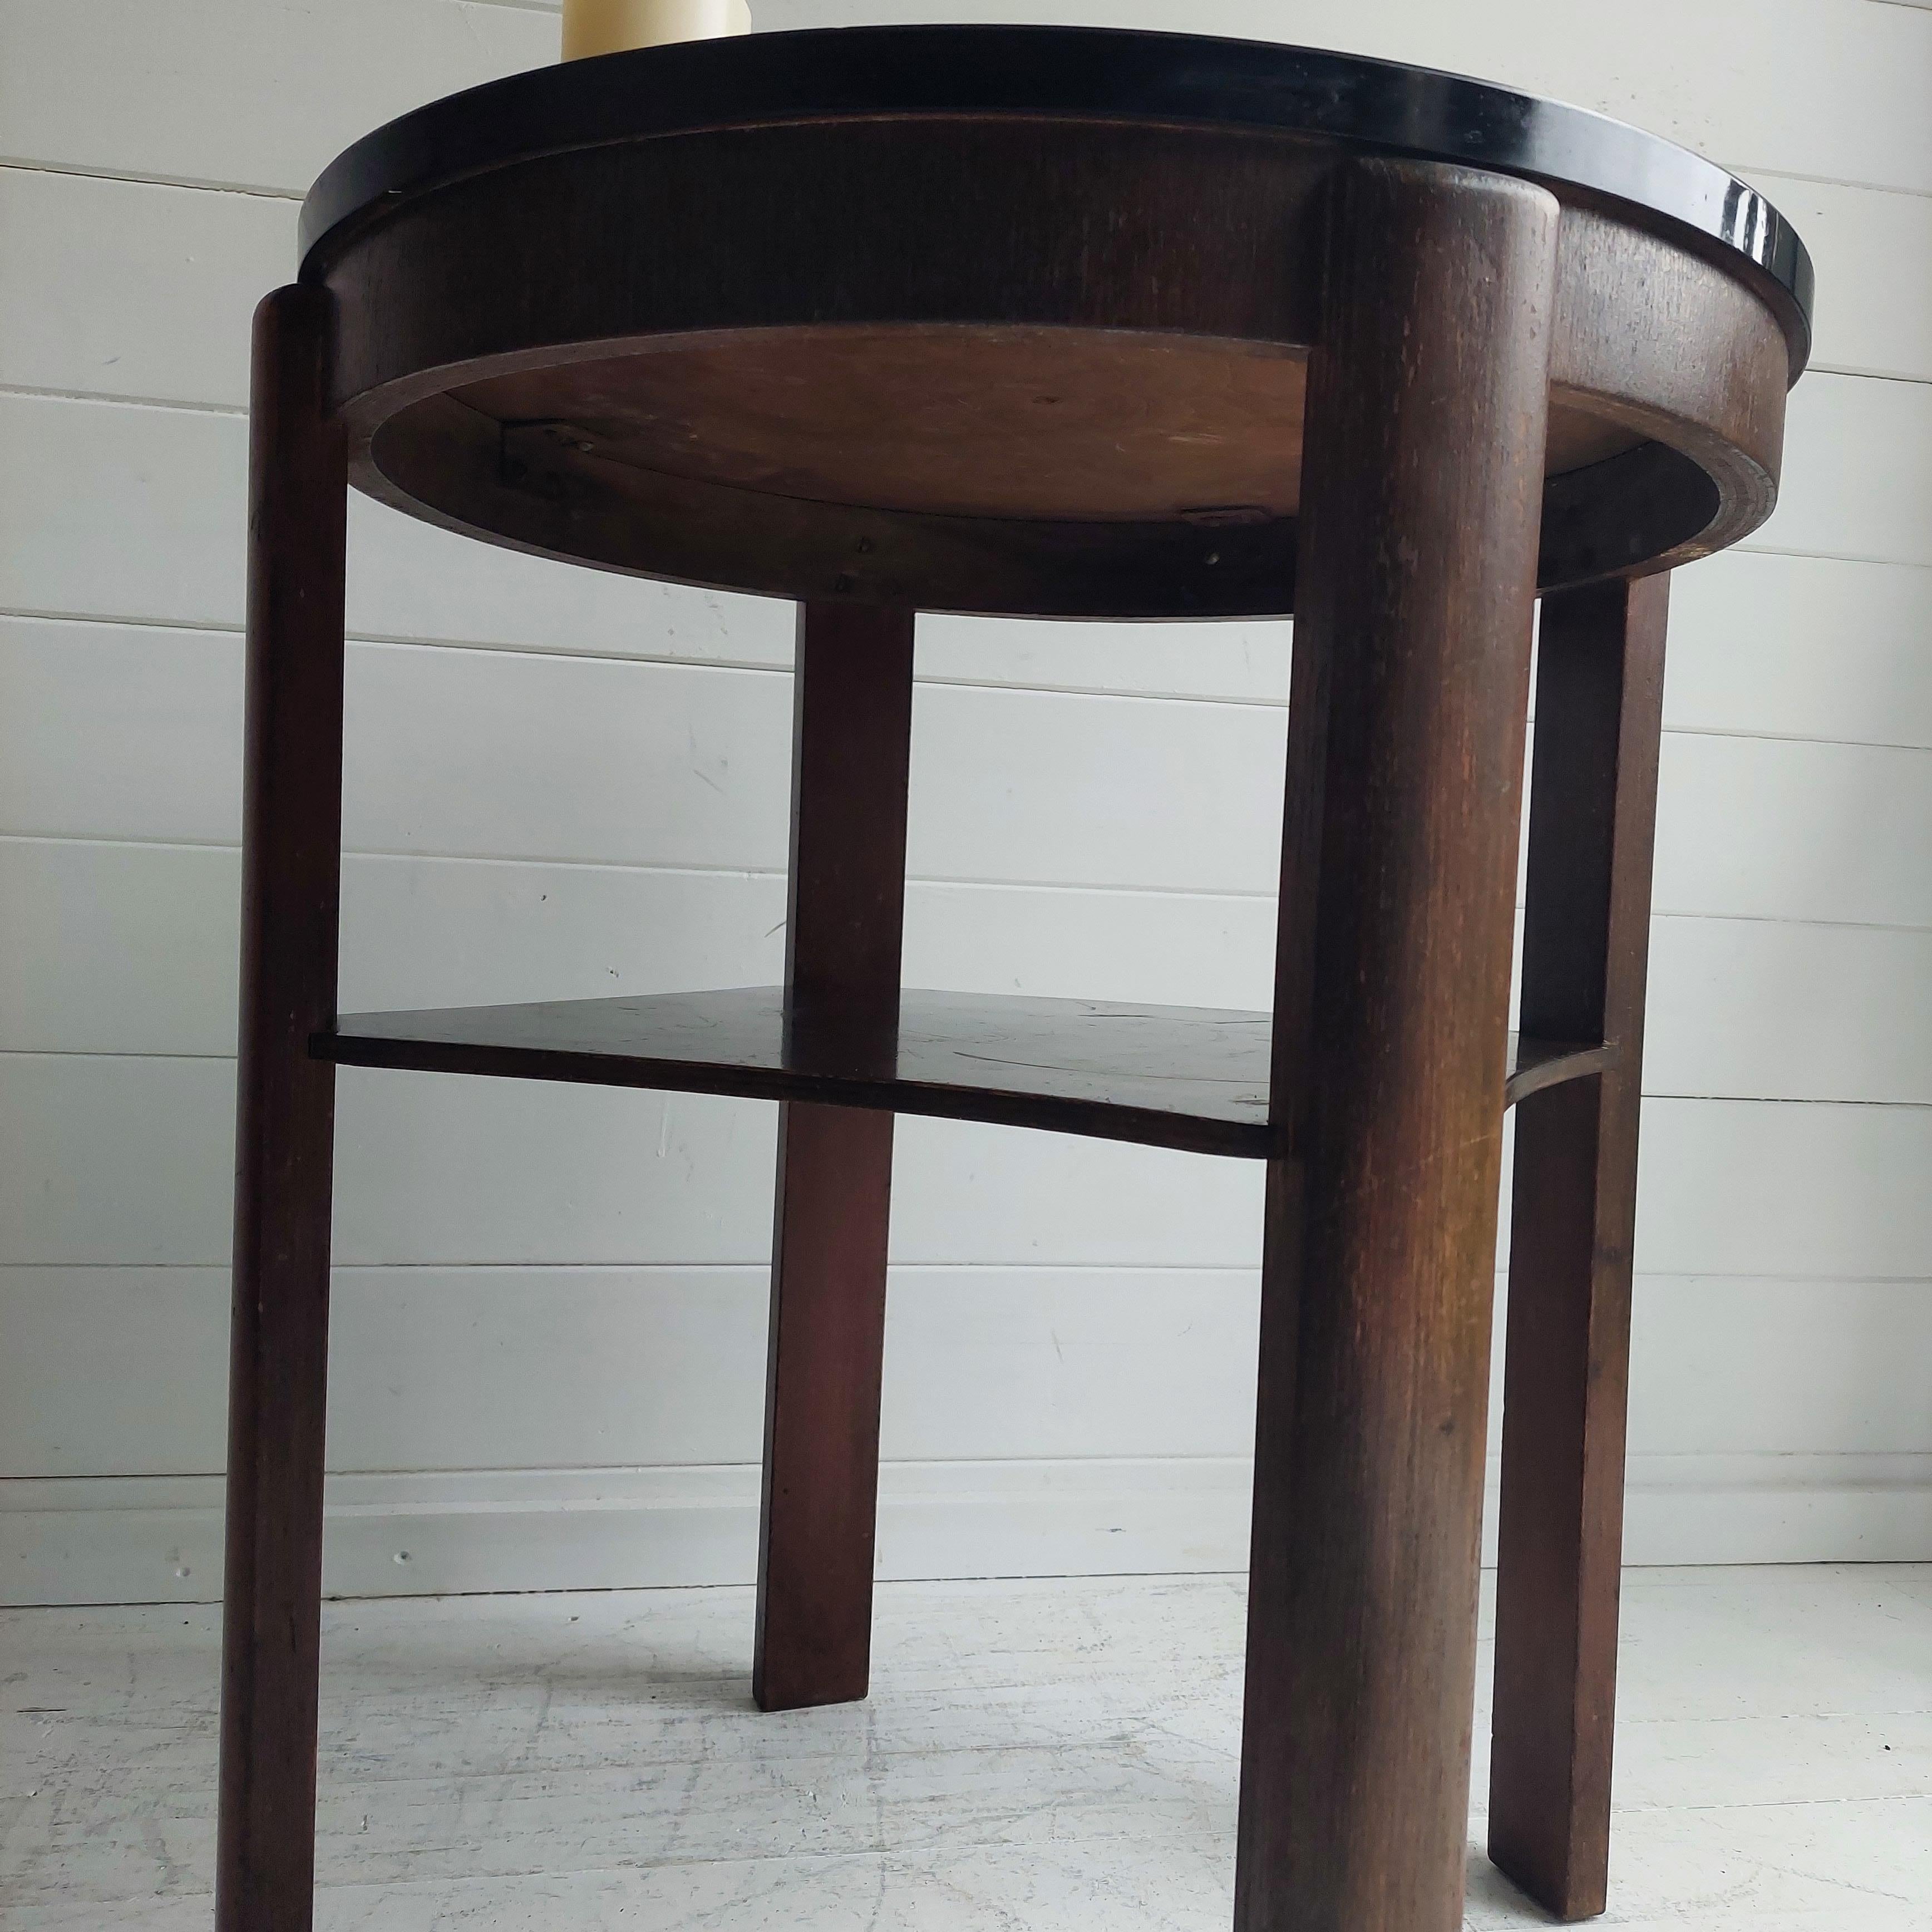 Oak Art Deco Round Gueridon side table in Laquered walnut and oak, Thonet Style 1930